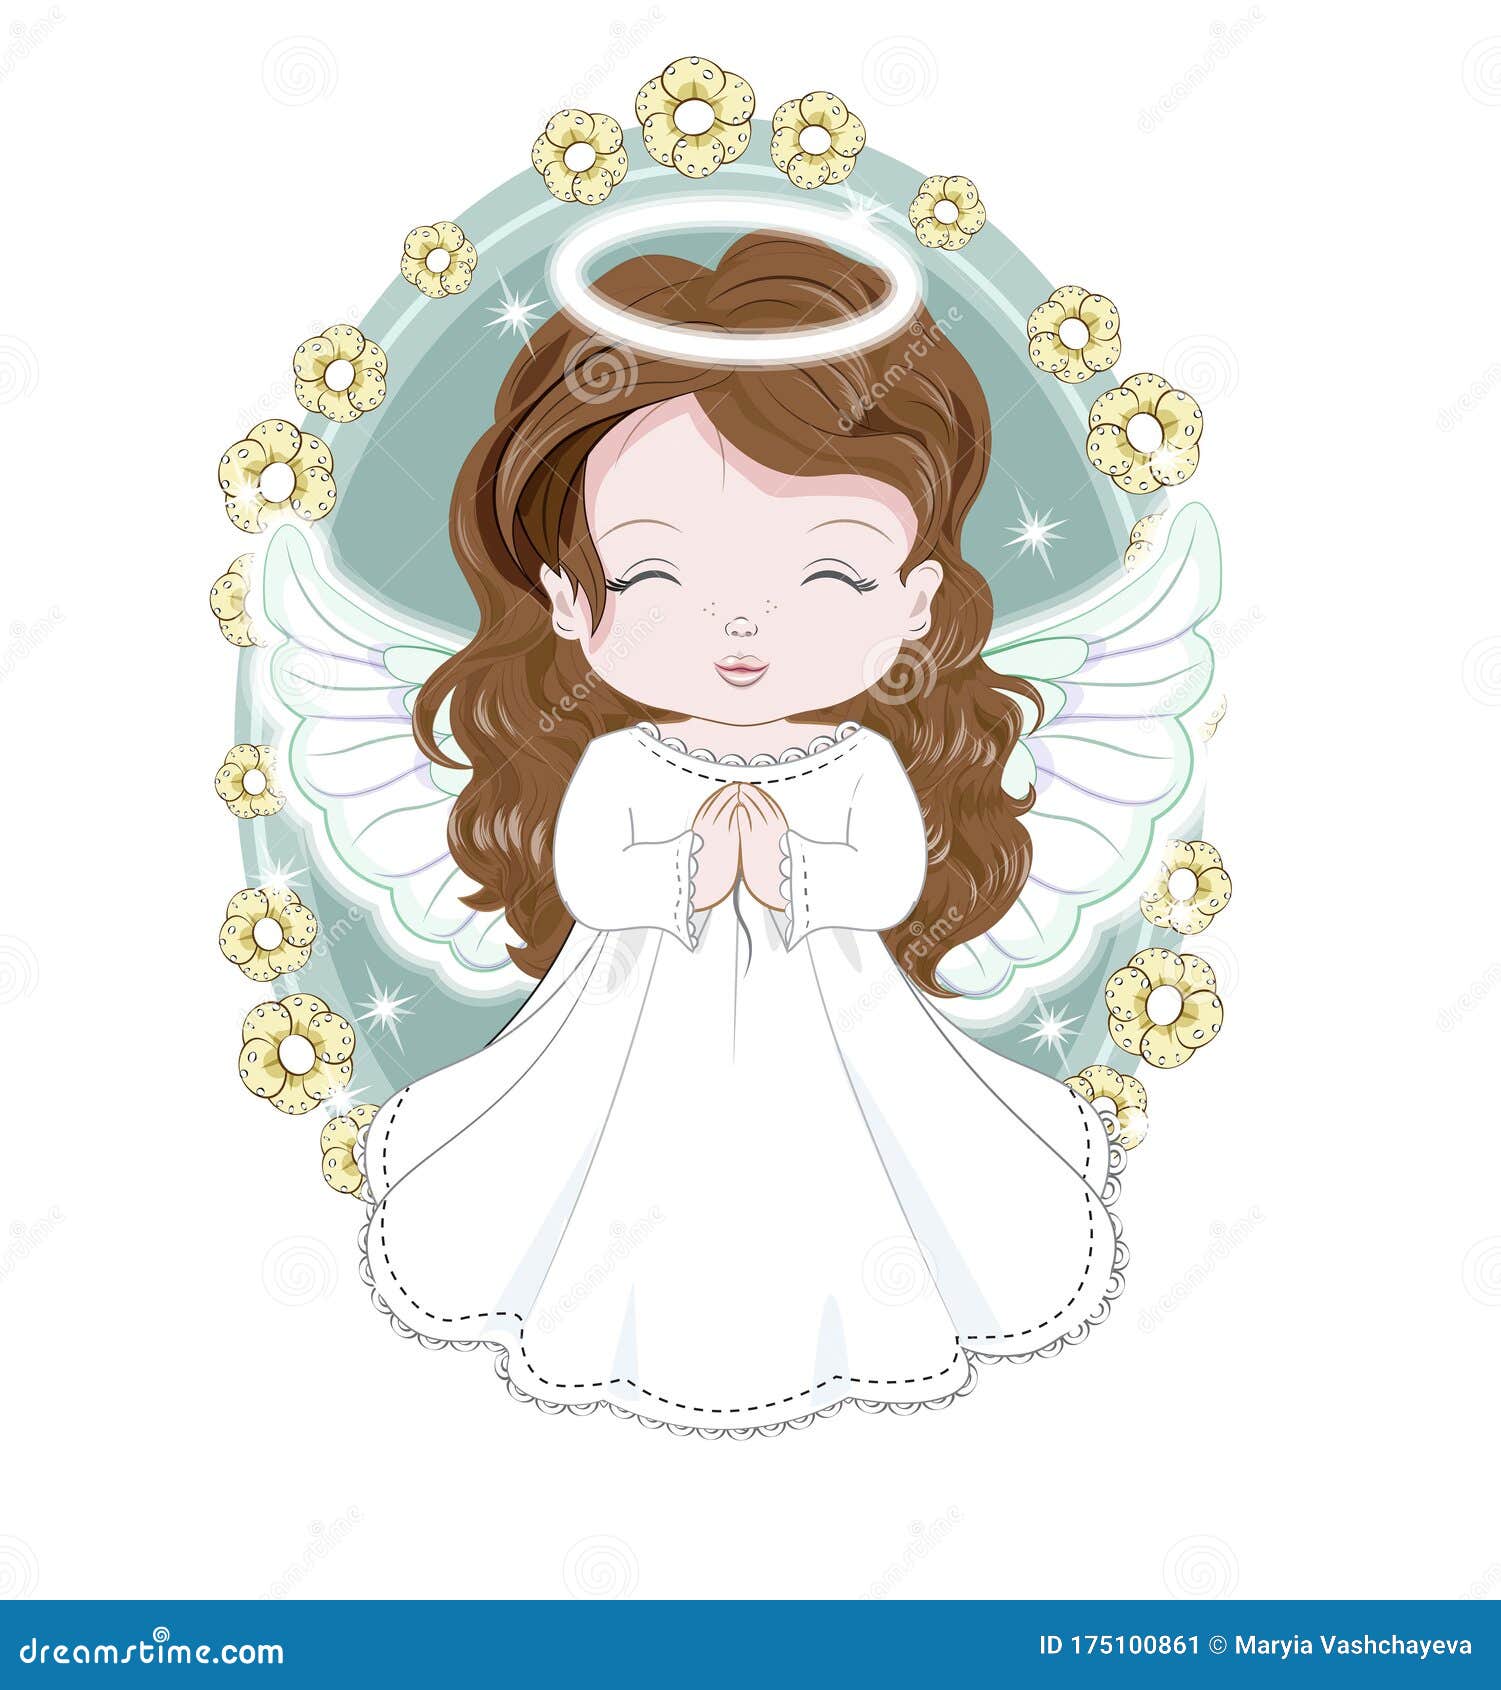 Cute baby angel stock vector. Illustration of drawing - 175100861